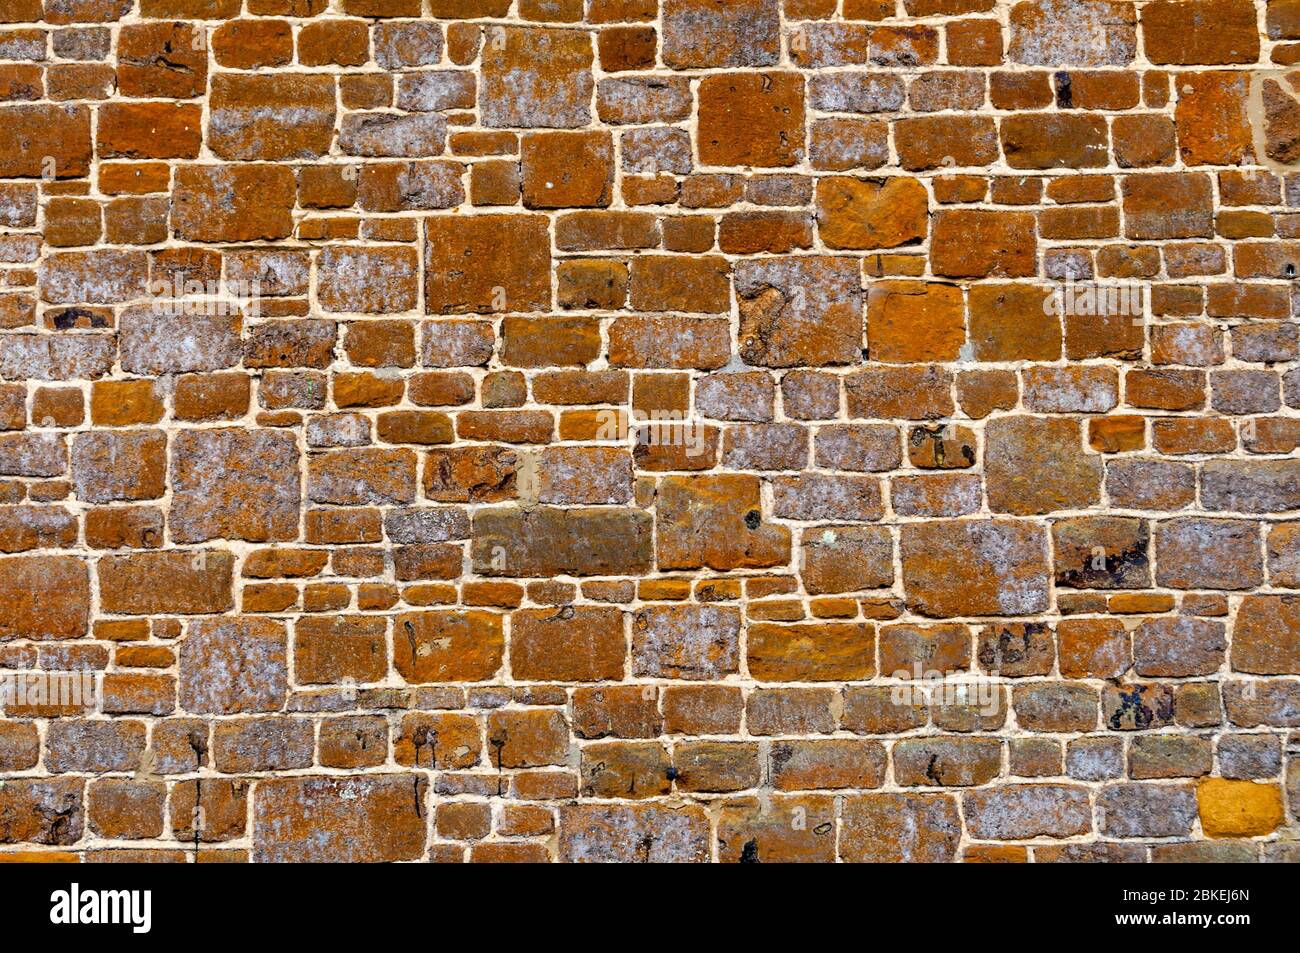 Cut blocks of carstone or carrstone used as a building material in the side of a Norfolk cottage. Stock Photo